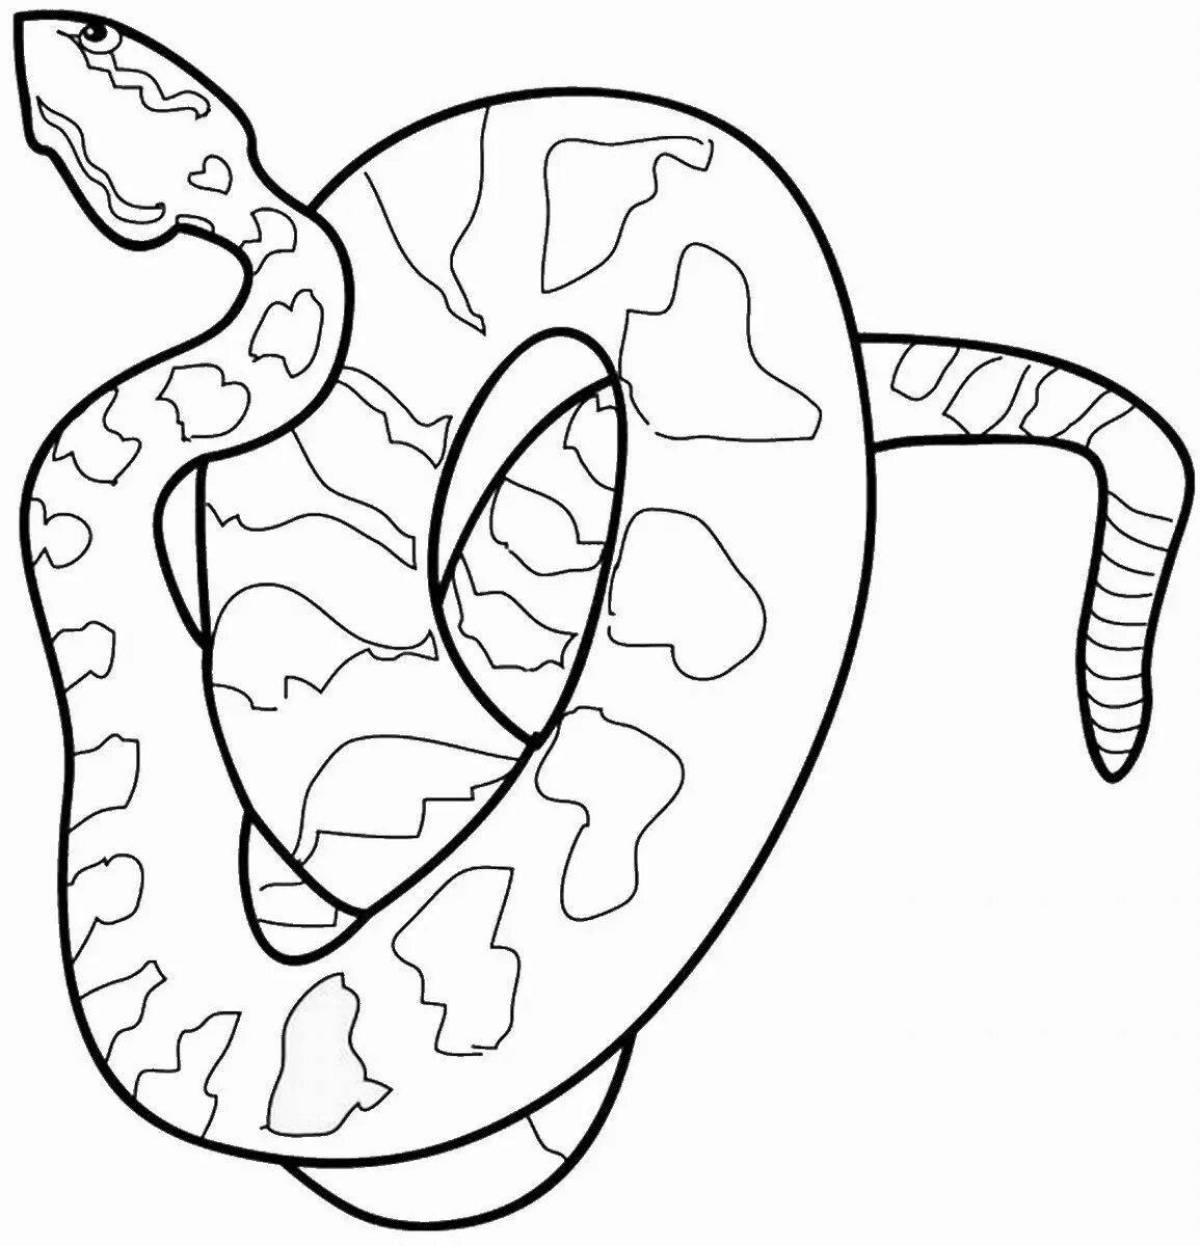 Amazing reptile coloring pages